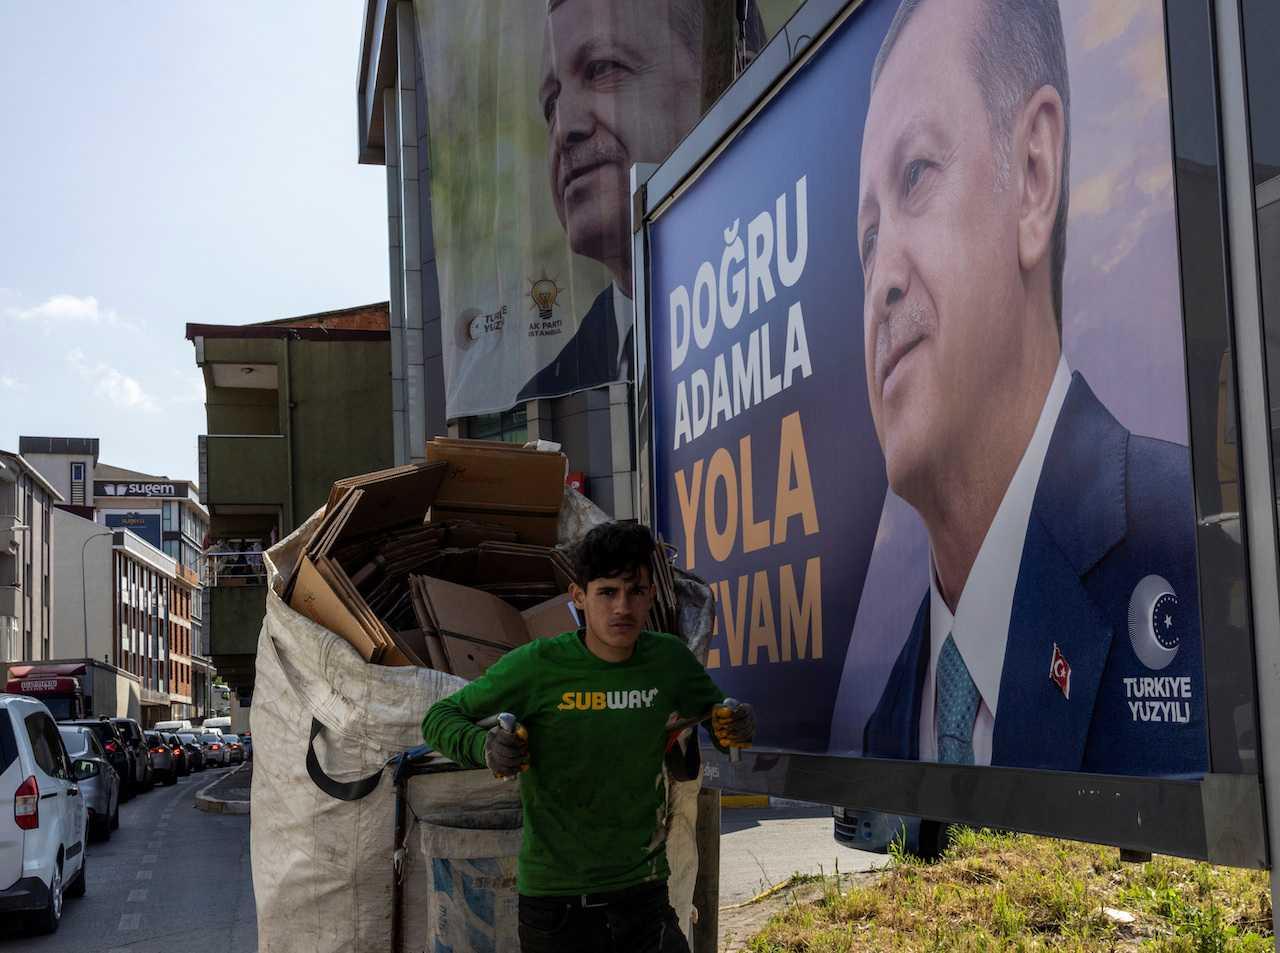 A man walks next posters of Turkish President Tayyip Erdogan, ahead of the May 28 presidential runoff vote, in Istanbul, May 22. Photo: Reuters